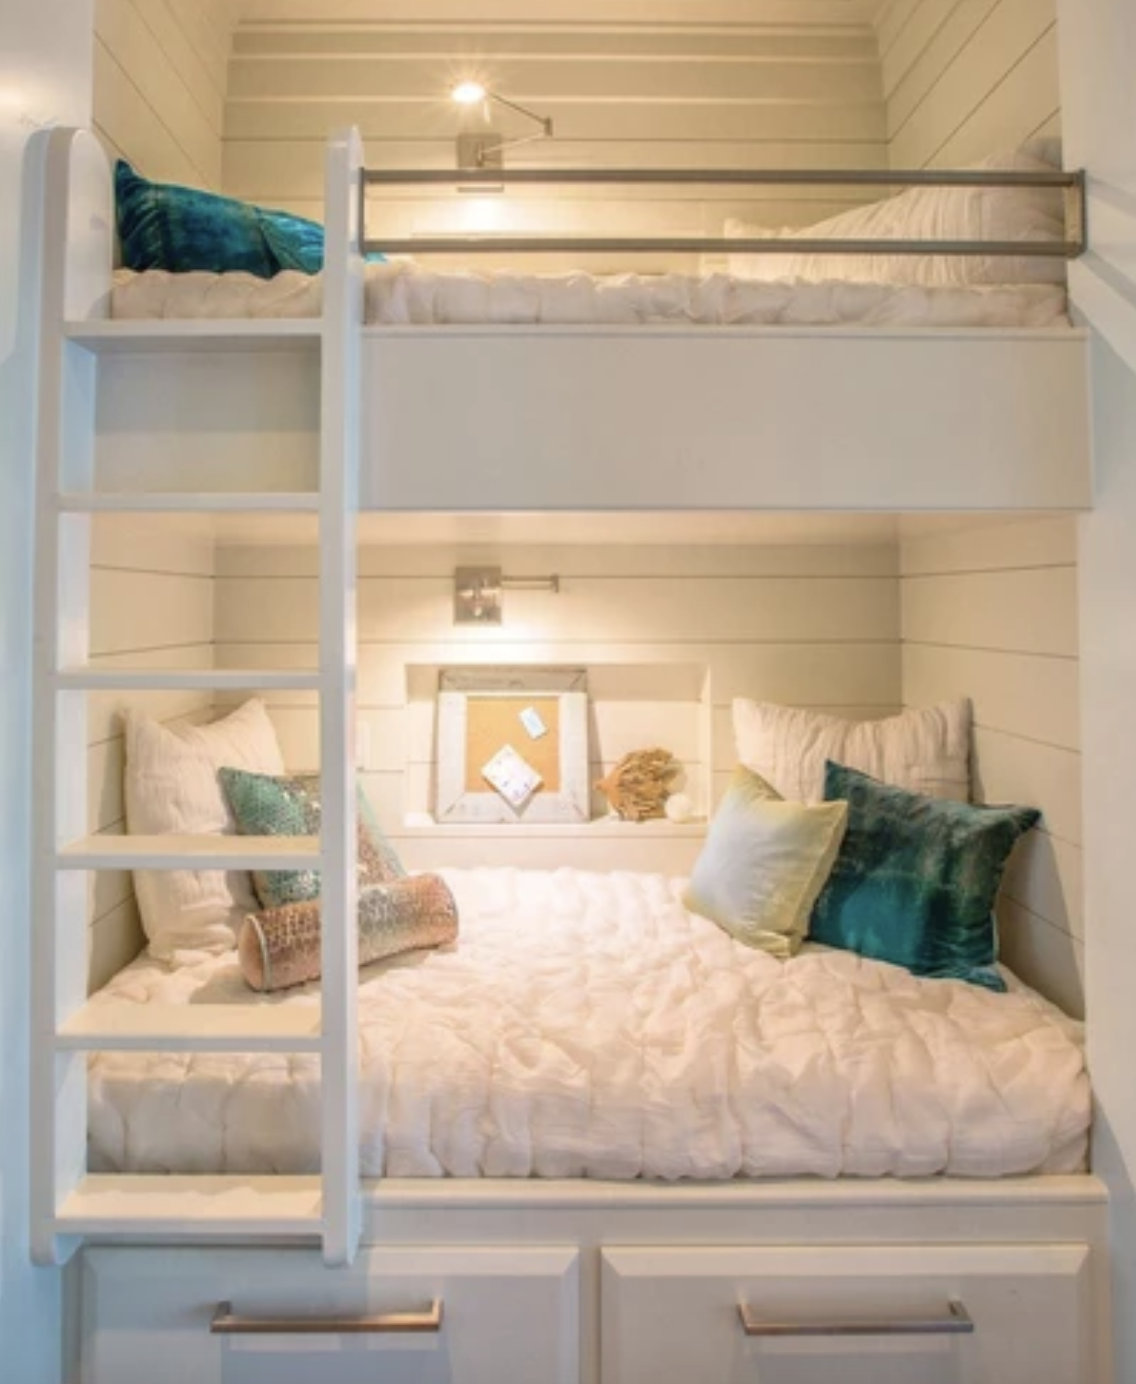 built in bunk beds small room